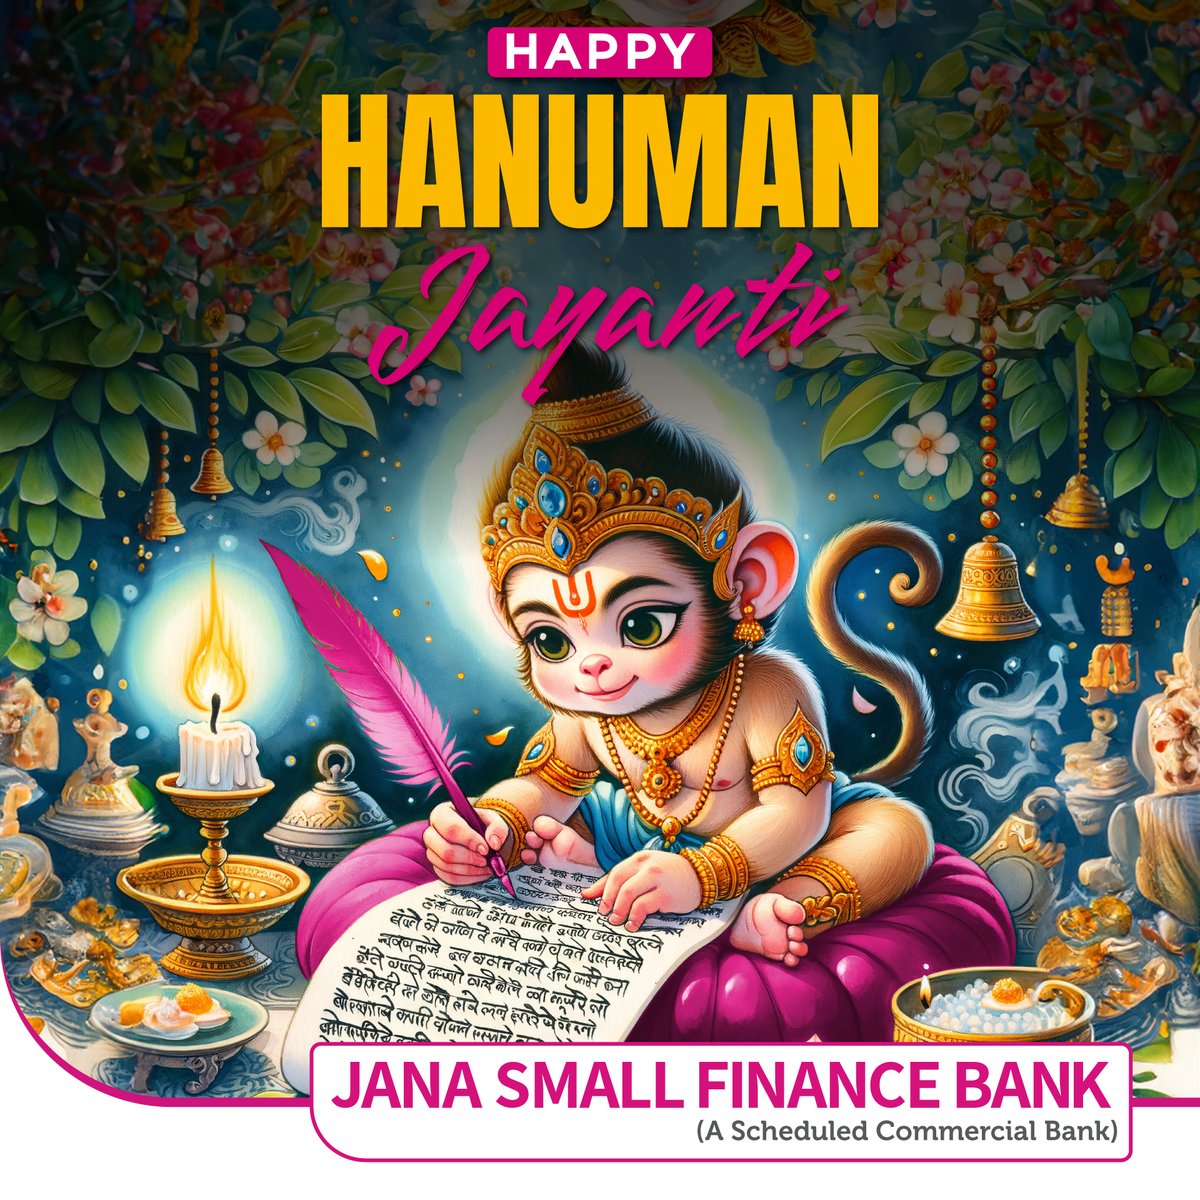 Happy Hanuman Jayanti! Let's celebrate Lord Hanuman's devotion and strength. May his blessings inspire courage and humility in our lives. #hamumanjayanti #janabank